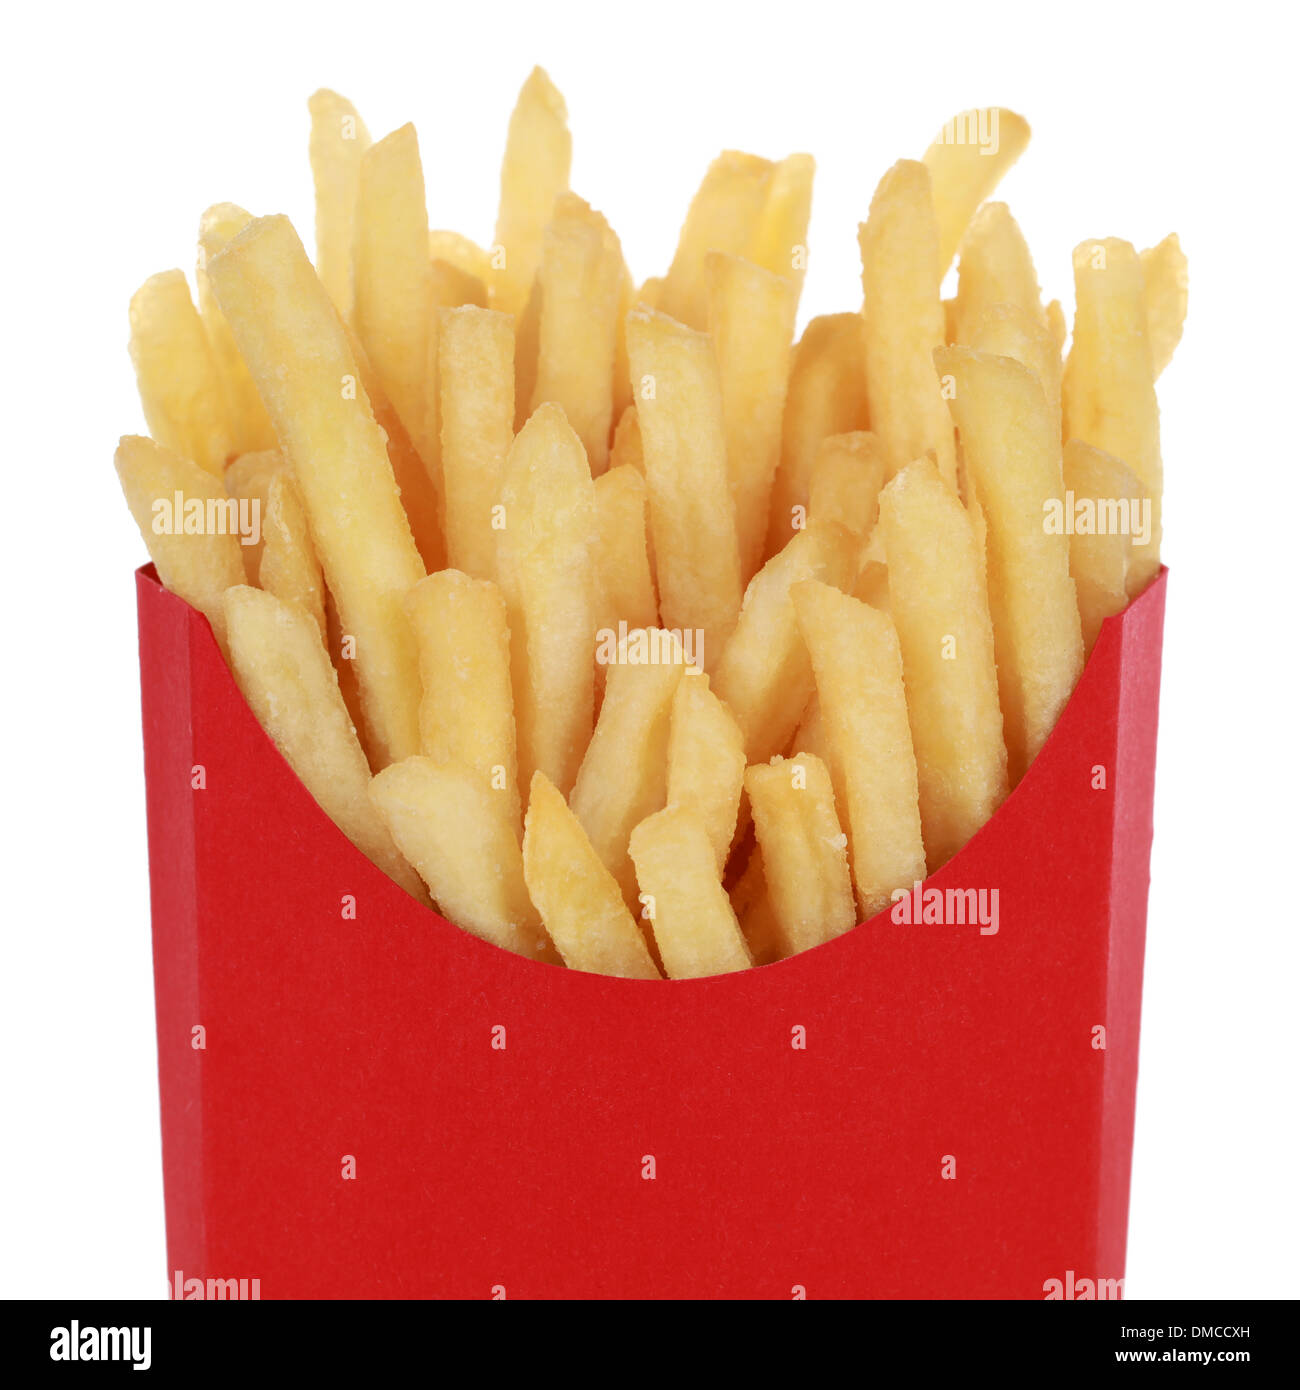 Focalmotors 20PCS Disposable Fast Food Fries Packing Box/French Fry Box  Takeaway Packaging Box, M